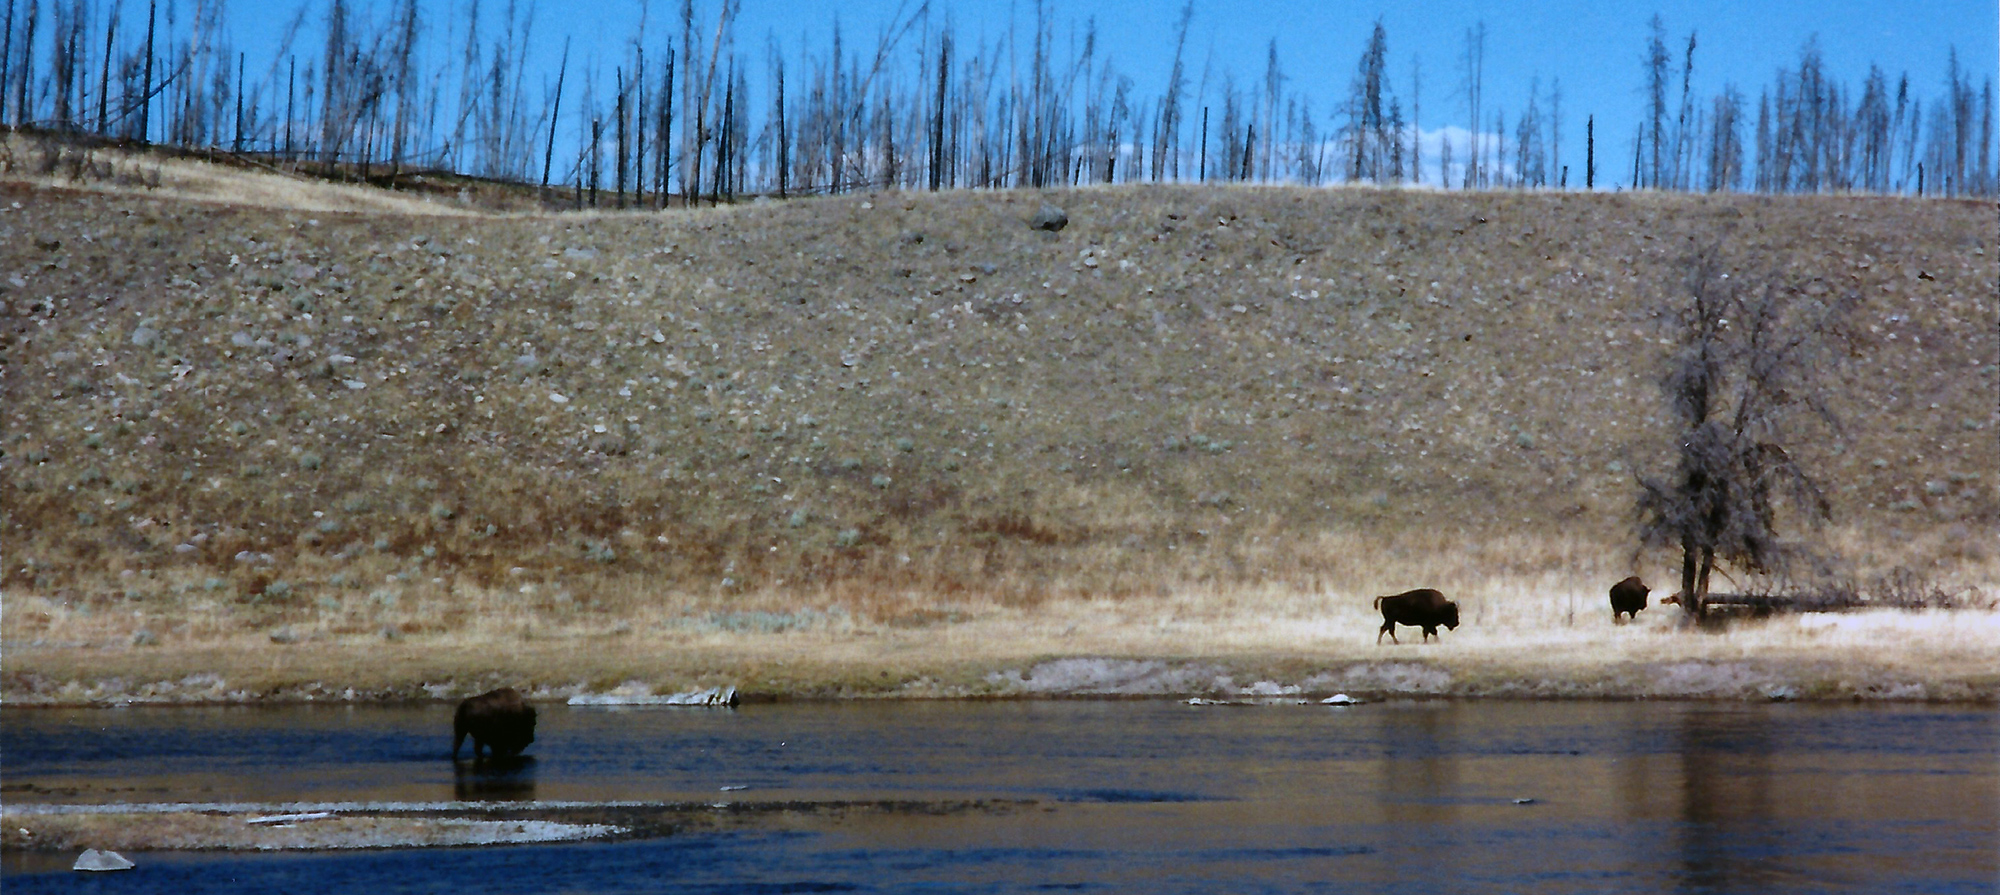 Buffalos in the Madison River